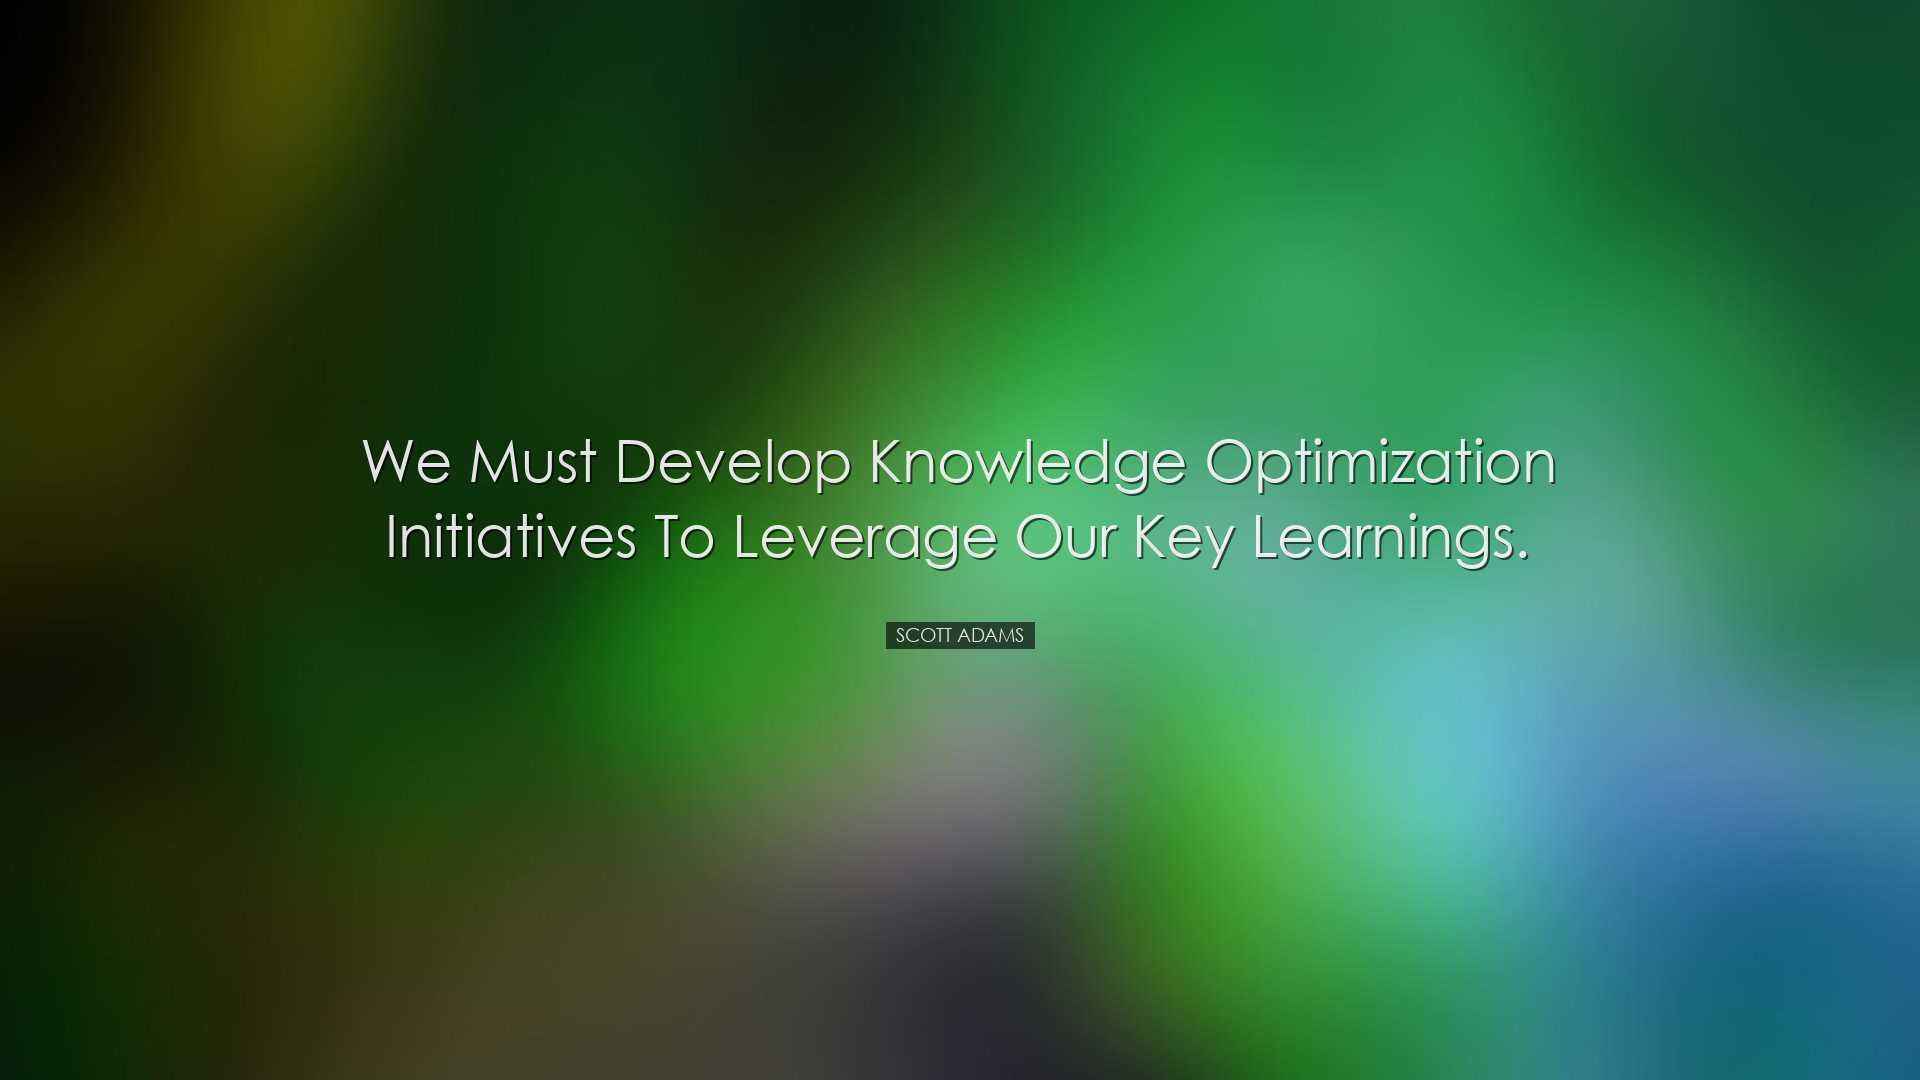 We must develop knowledge optimization initiatives to leverage our